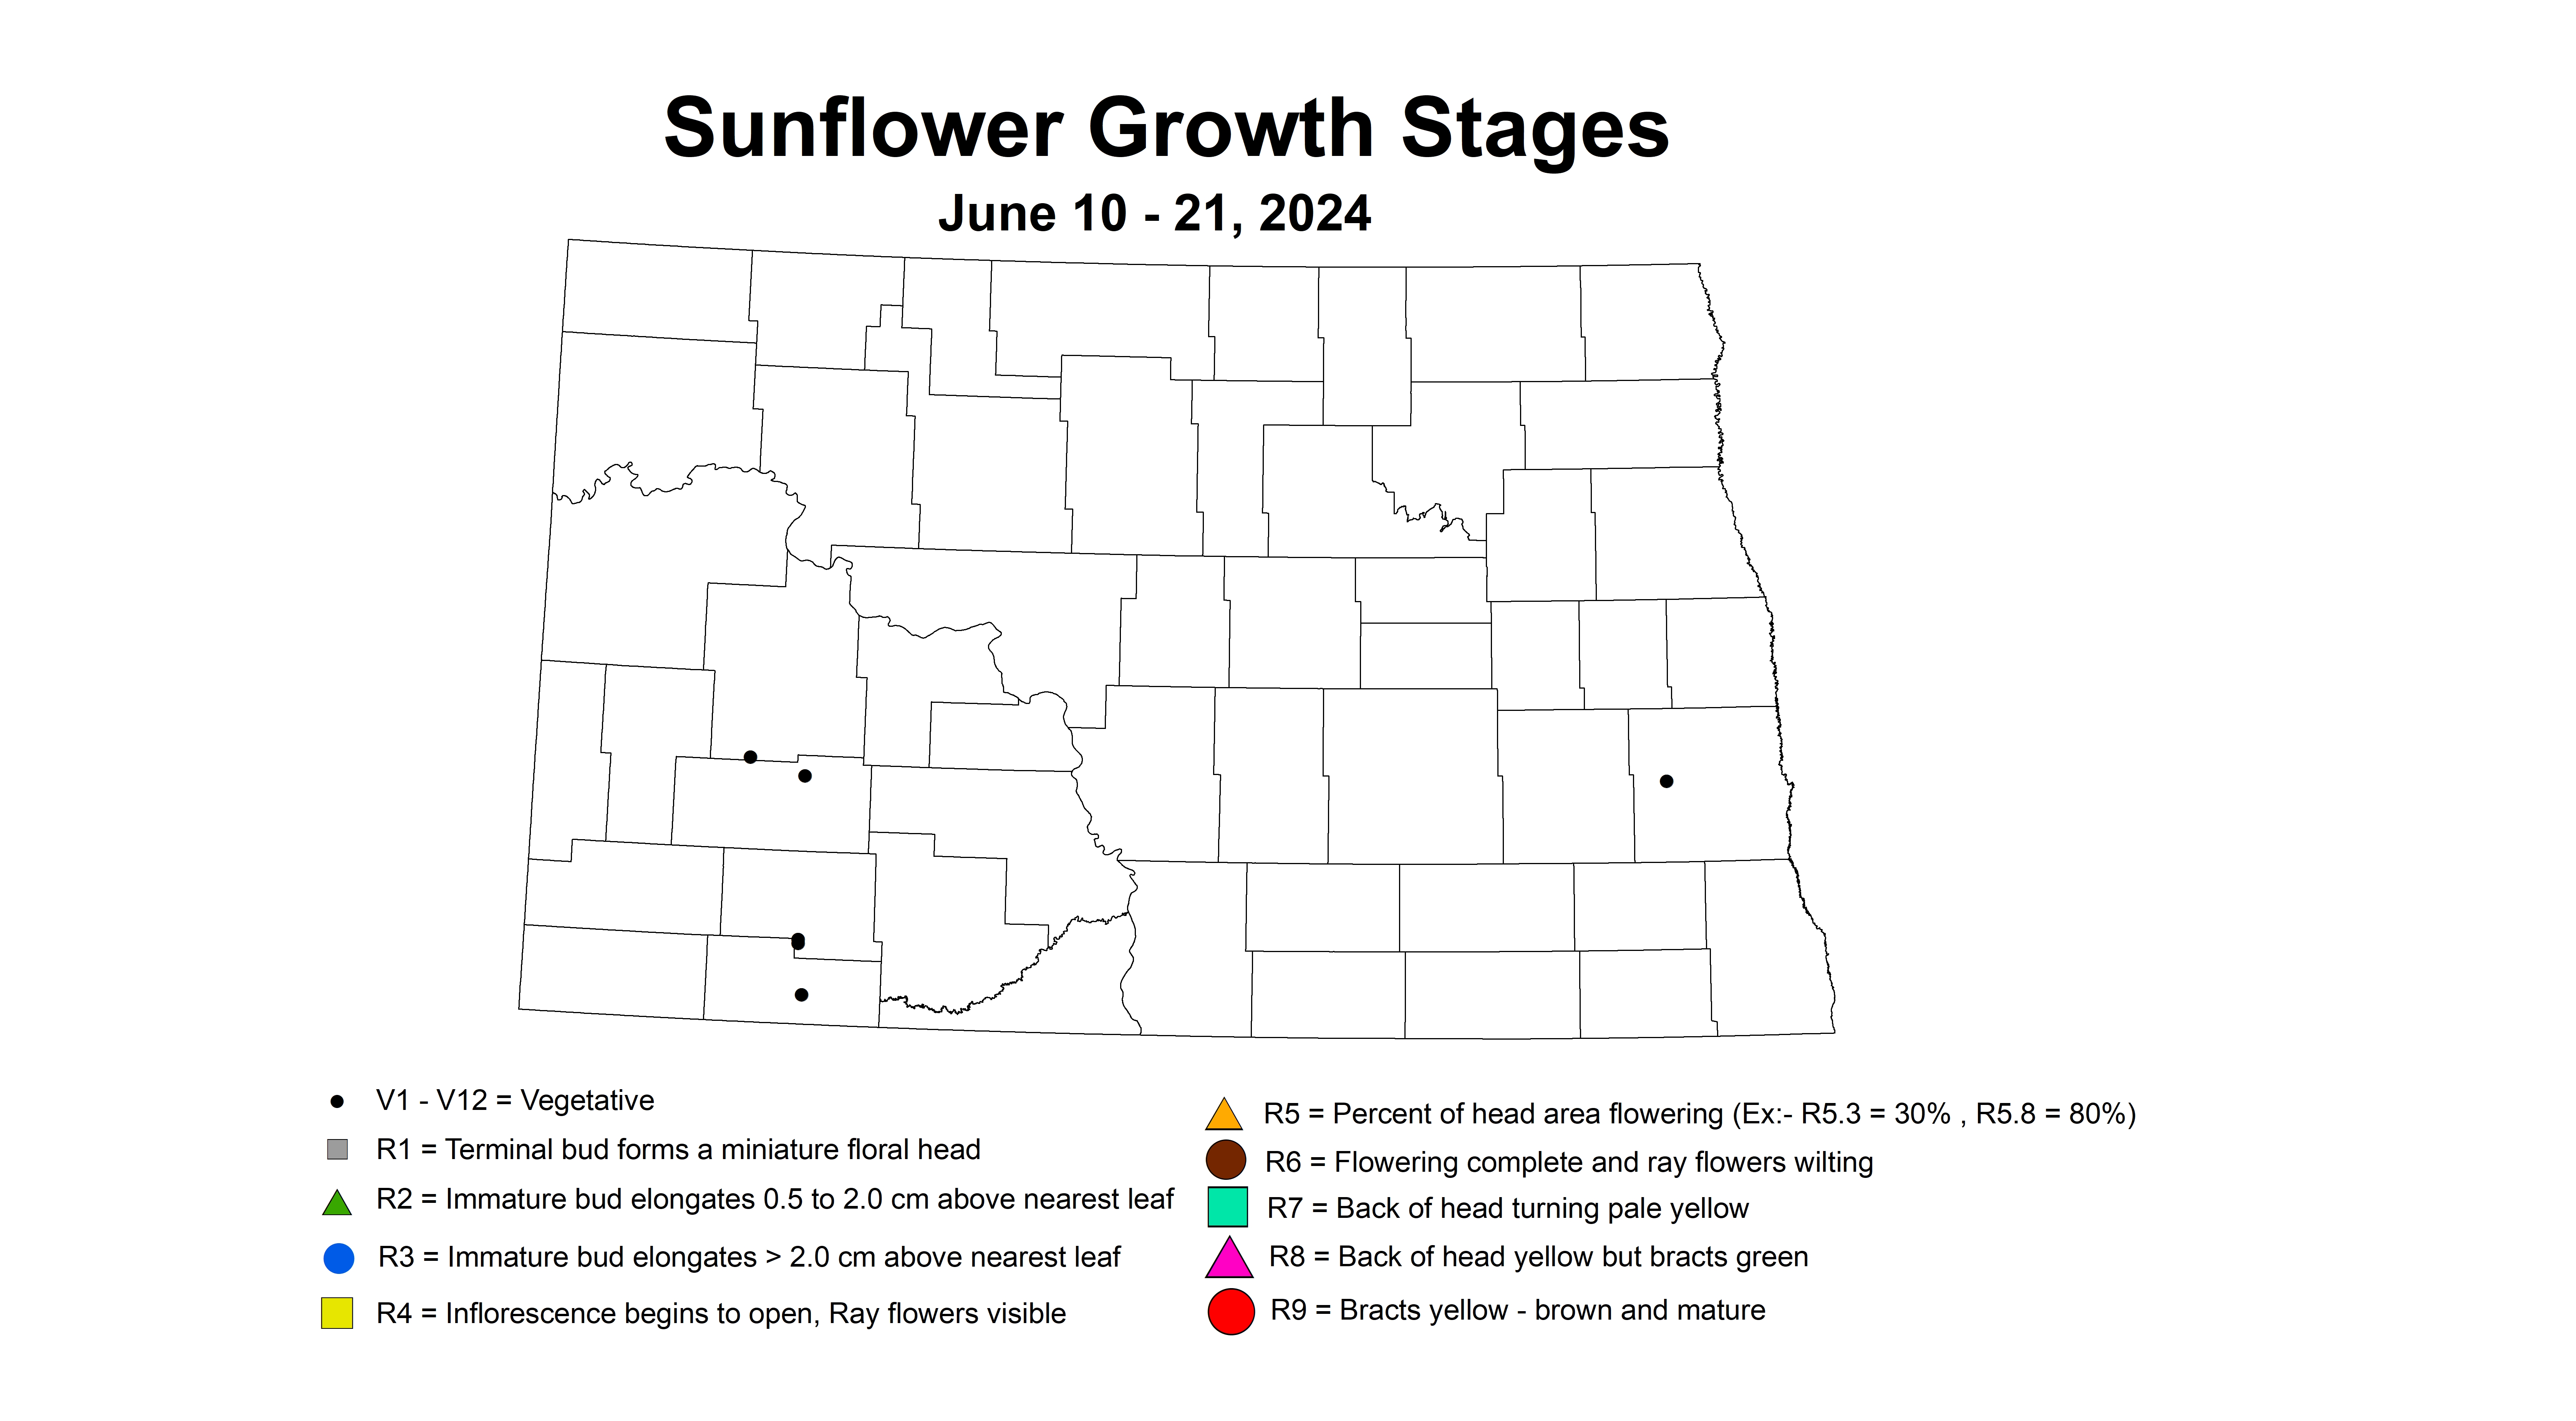 sunflower growth stages June10-21 2024